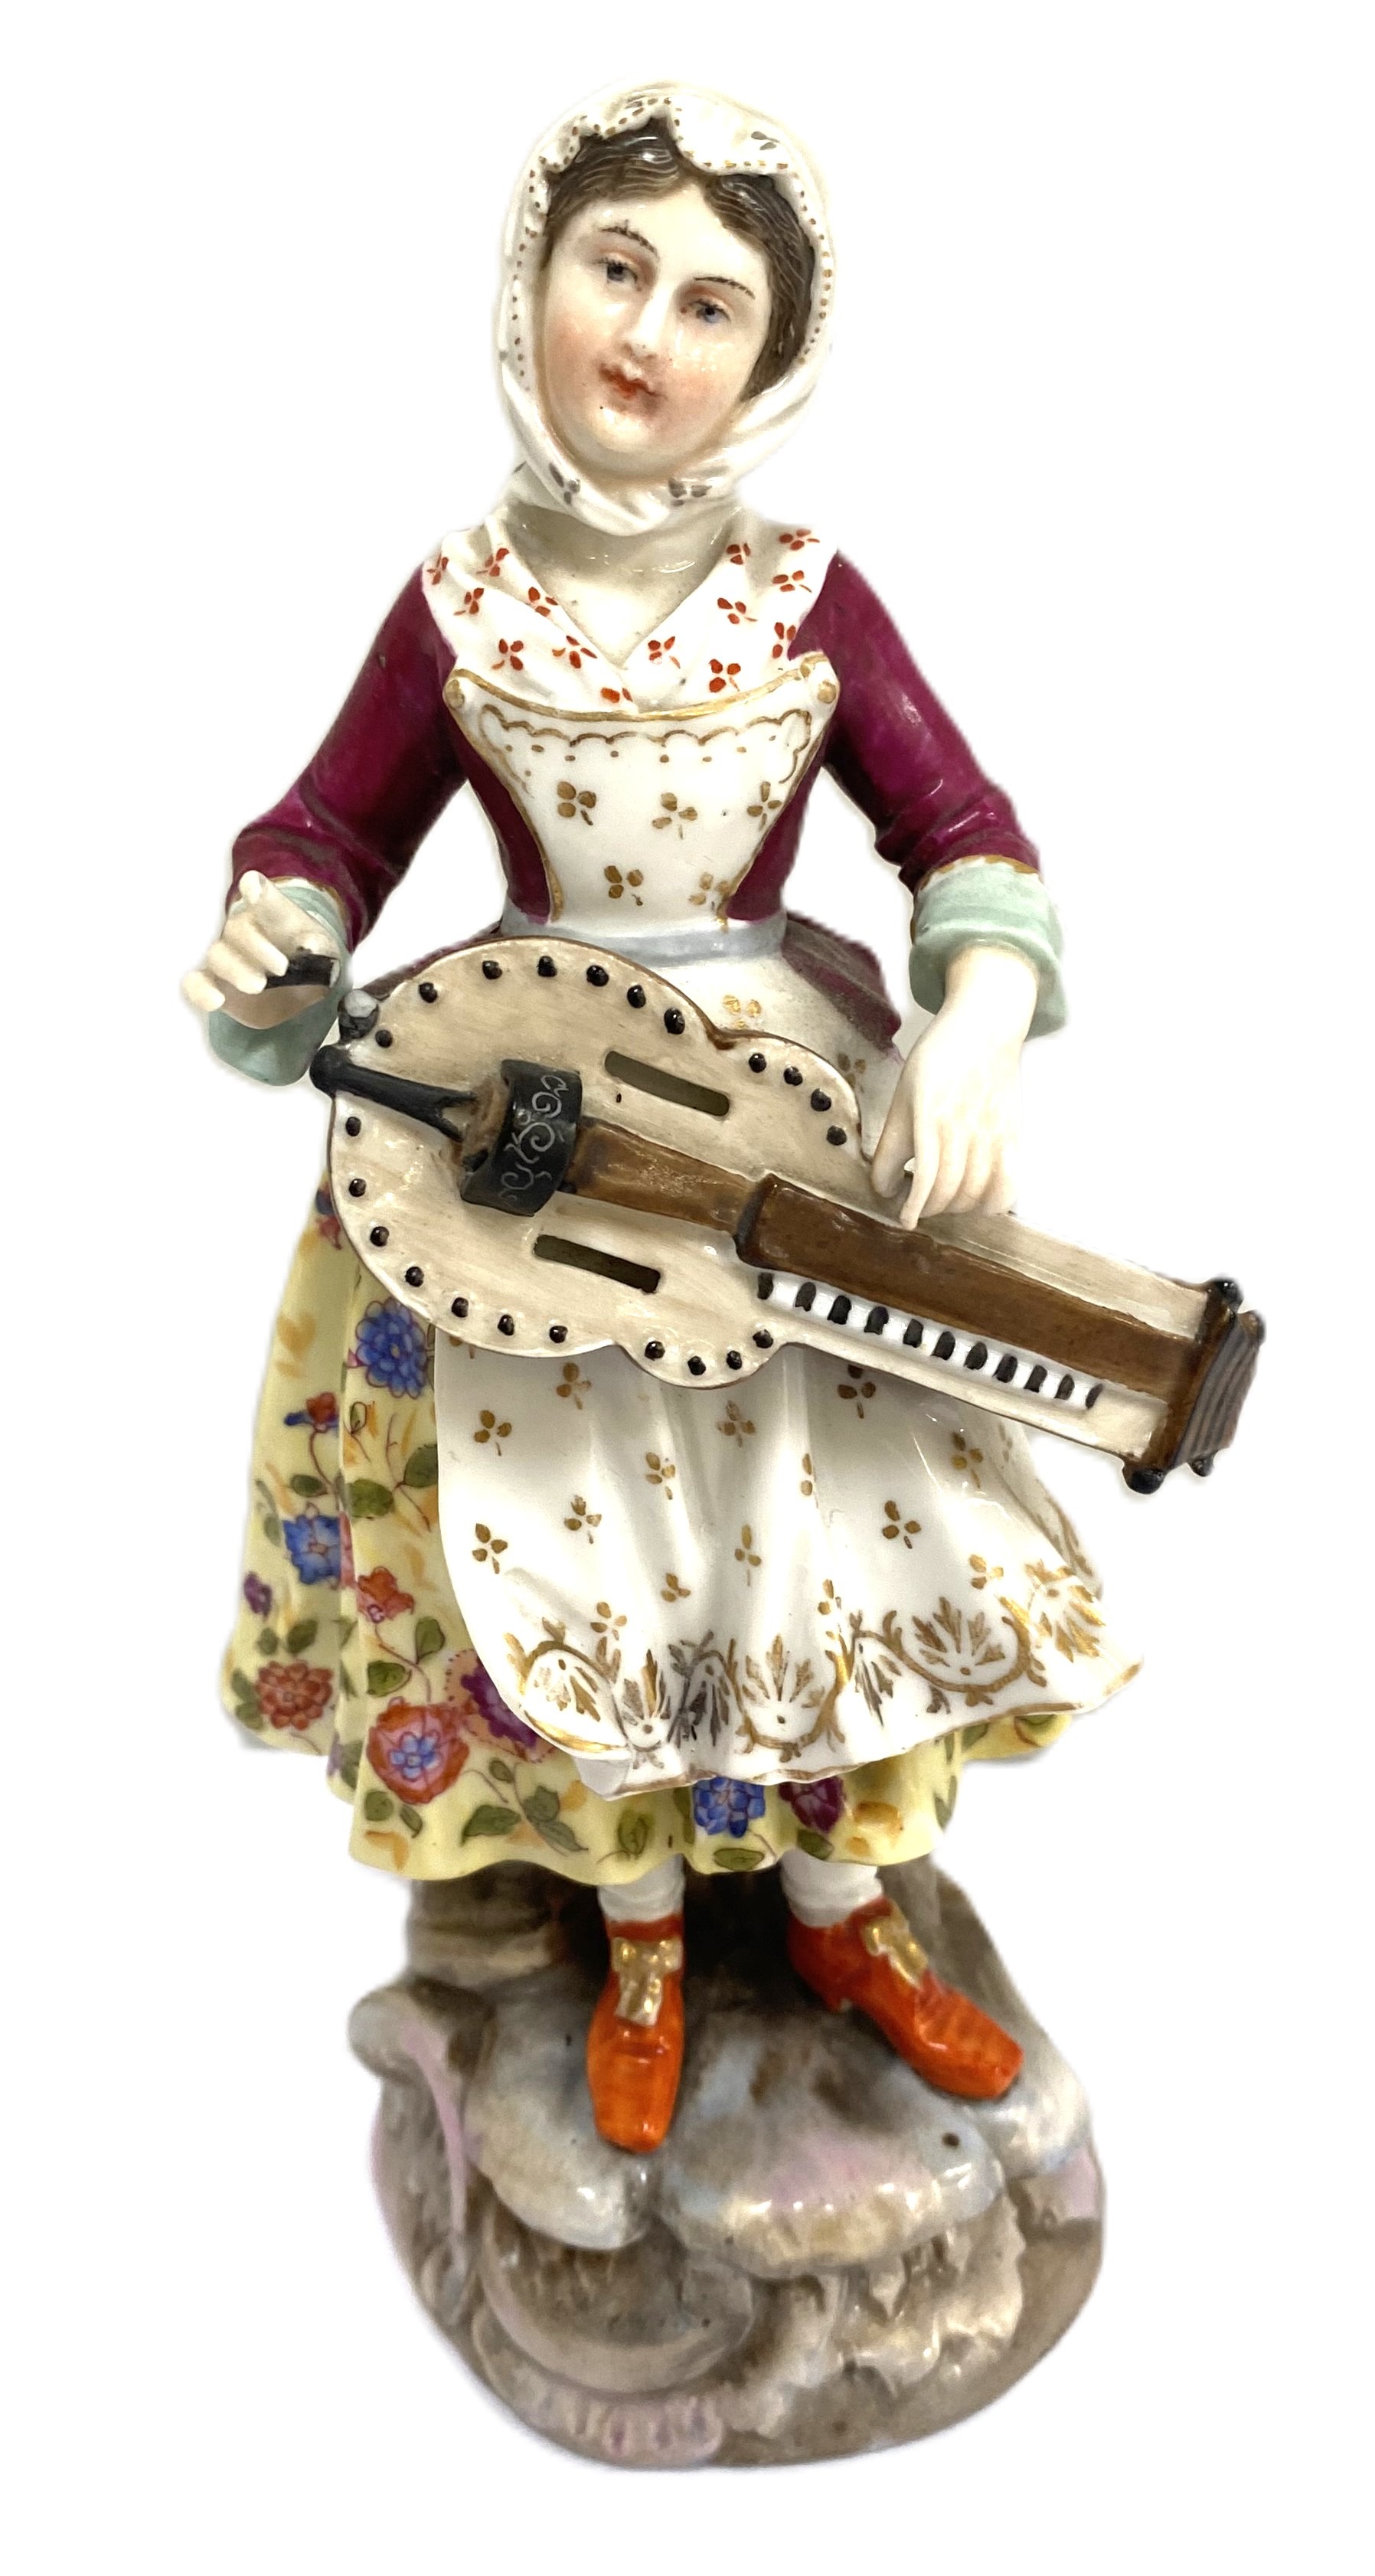 A pair of Dresden porcelain figures of a Lady and Gallant, dressed for hunting, she with a musket - Image 4 of 6